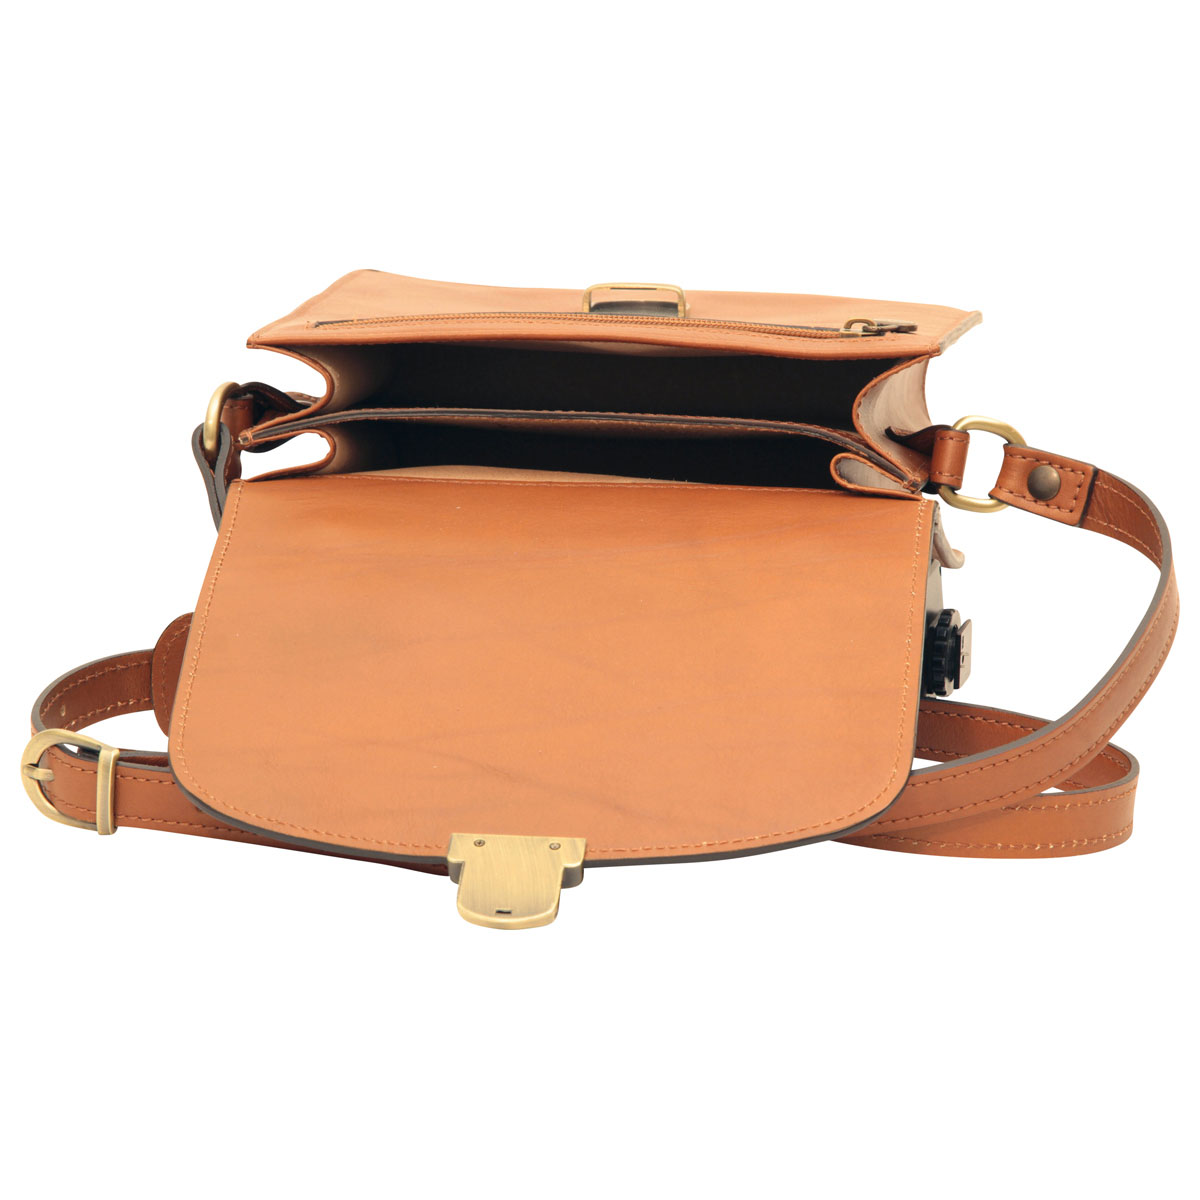 Classica II Leather Satchel - Brown Colonial | 079689CO US | Old Angler Firenze